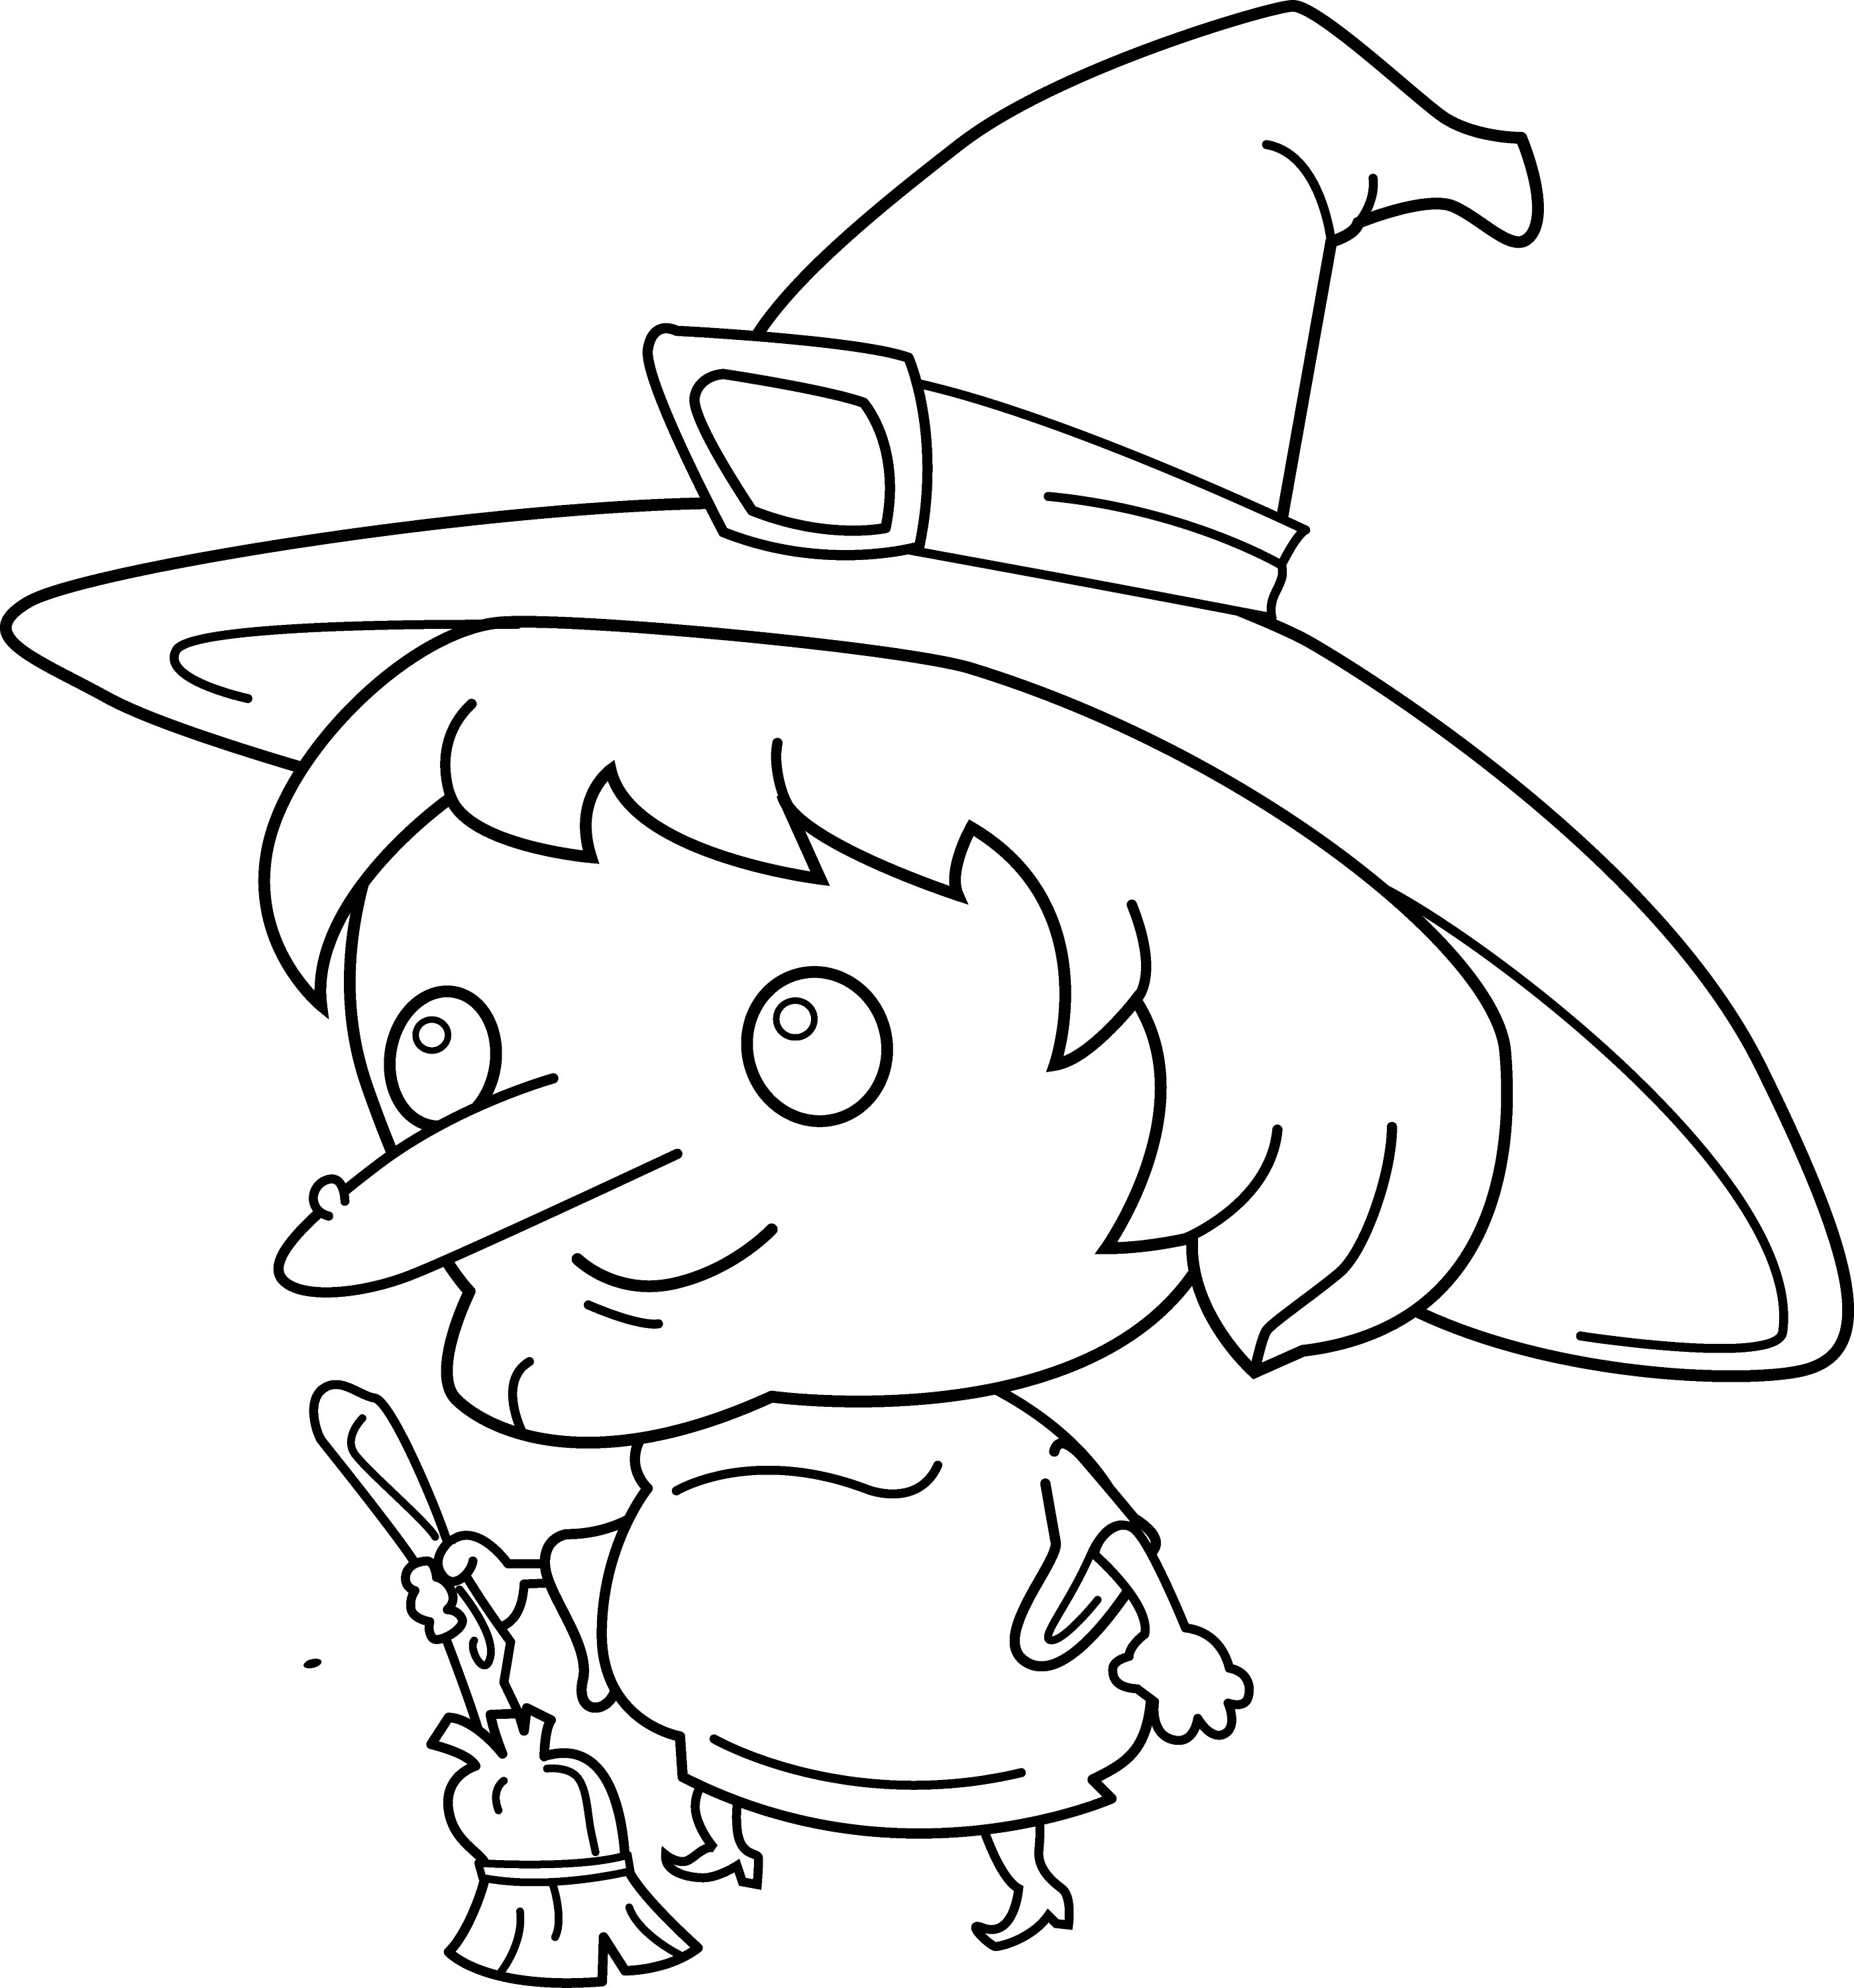 Download Cute Witch Coloring Page - Free Clip Art